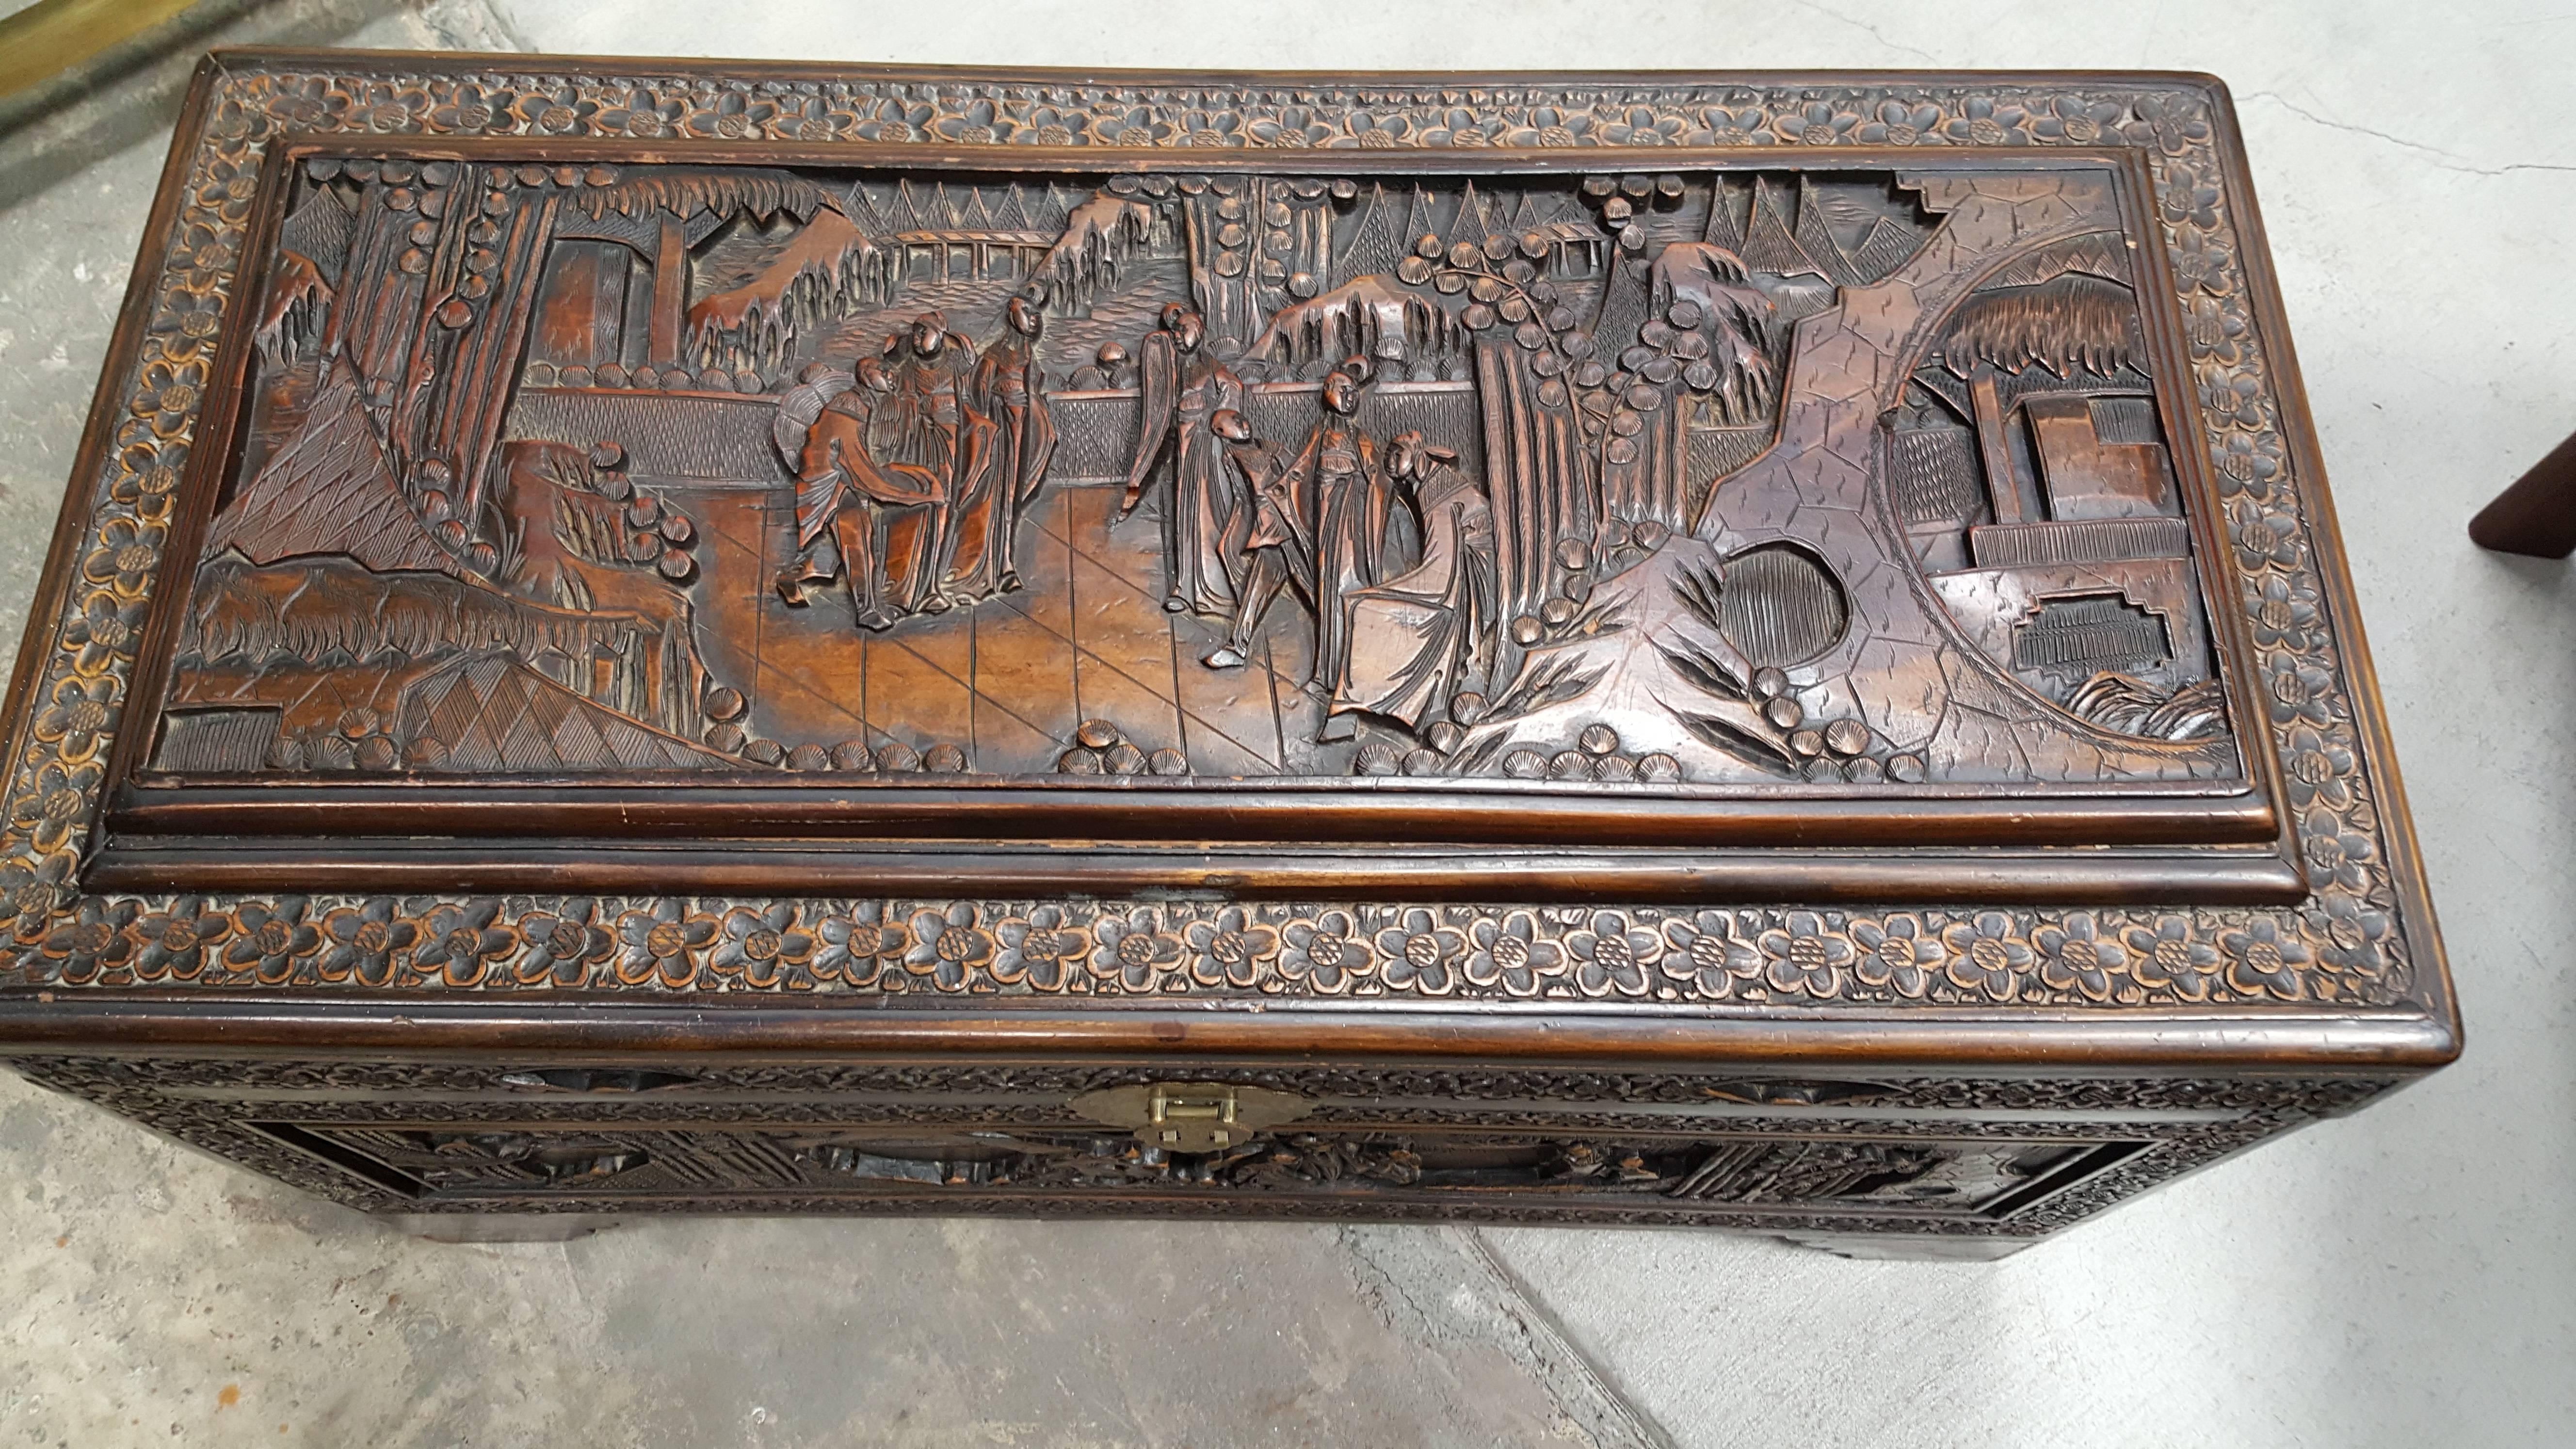 A mid-20th century high relief and hand-carved Chinese trunk. Brass mounts and camphor lined interior. Original finish. This trunk would make an excellent coffee or side table as it is carved on all sides.